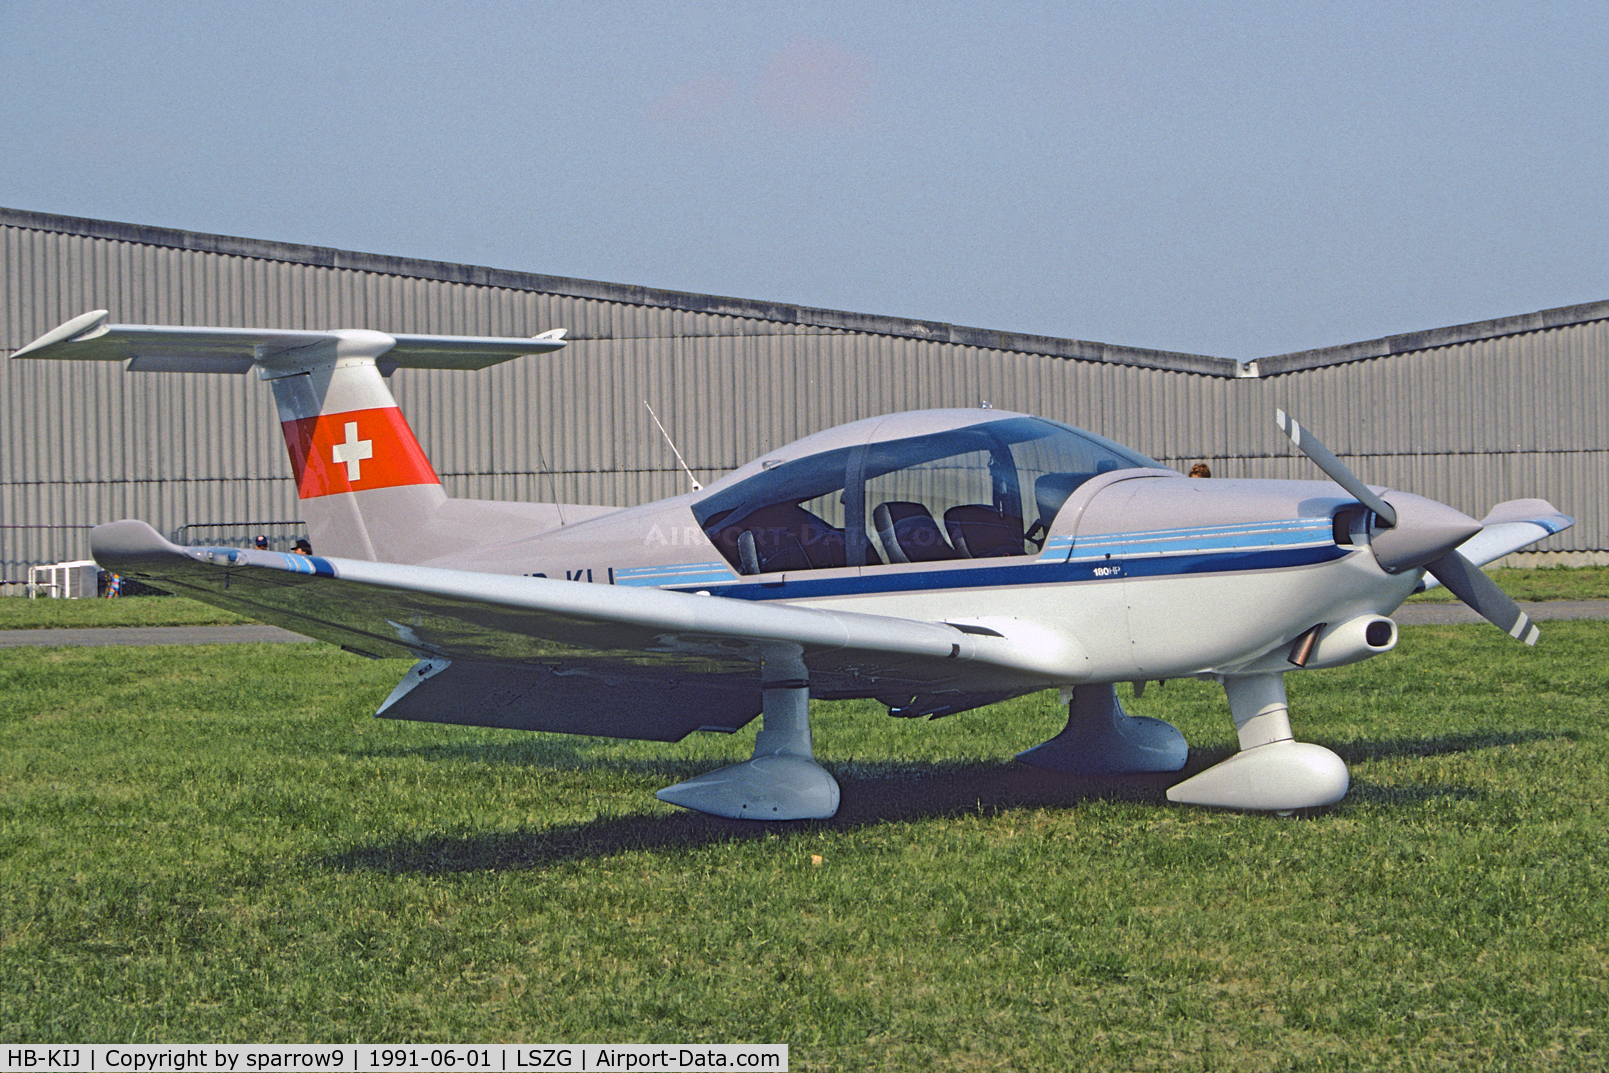 HB-KIJ, 1991 Robin R-3000-160 C/N 150, General Aviation Show at Grenchen